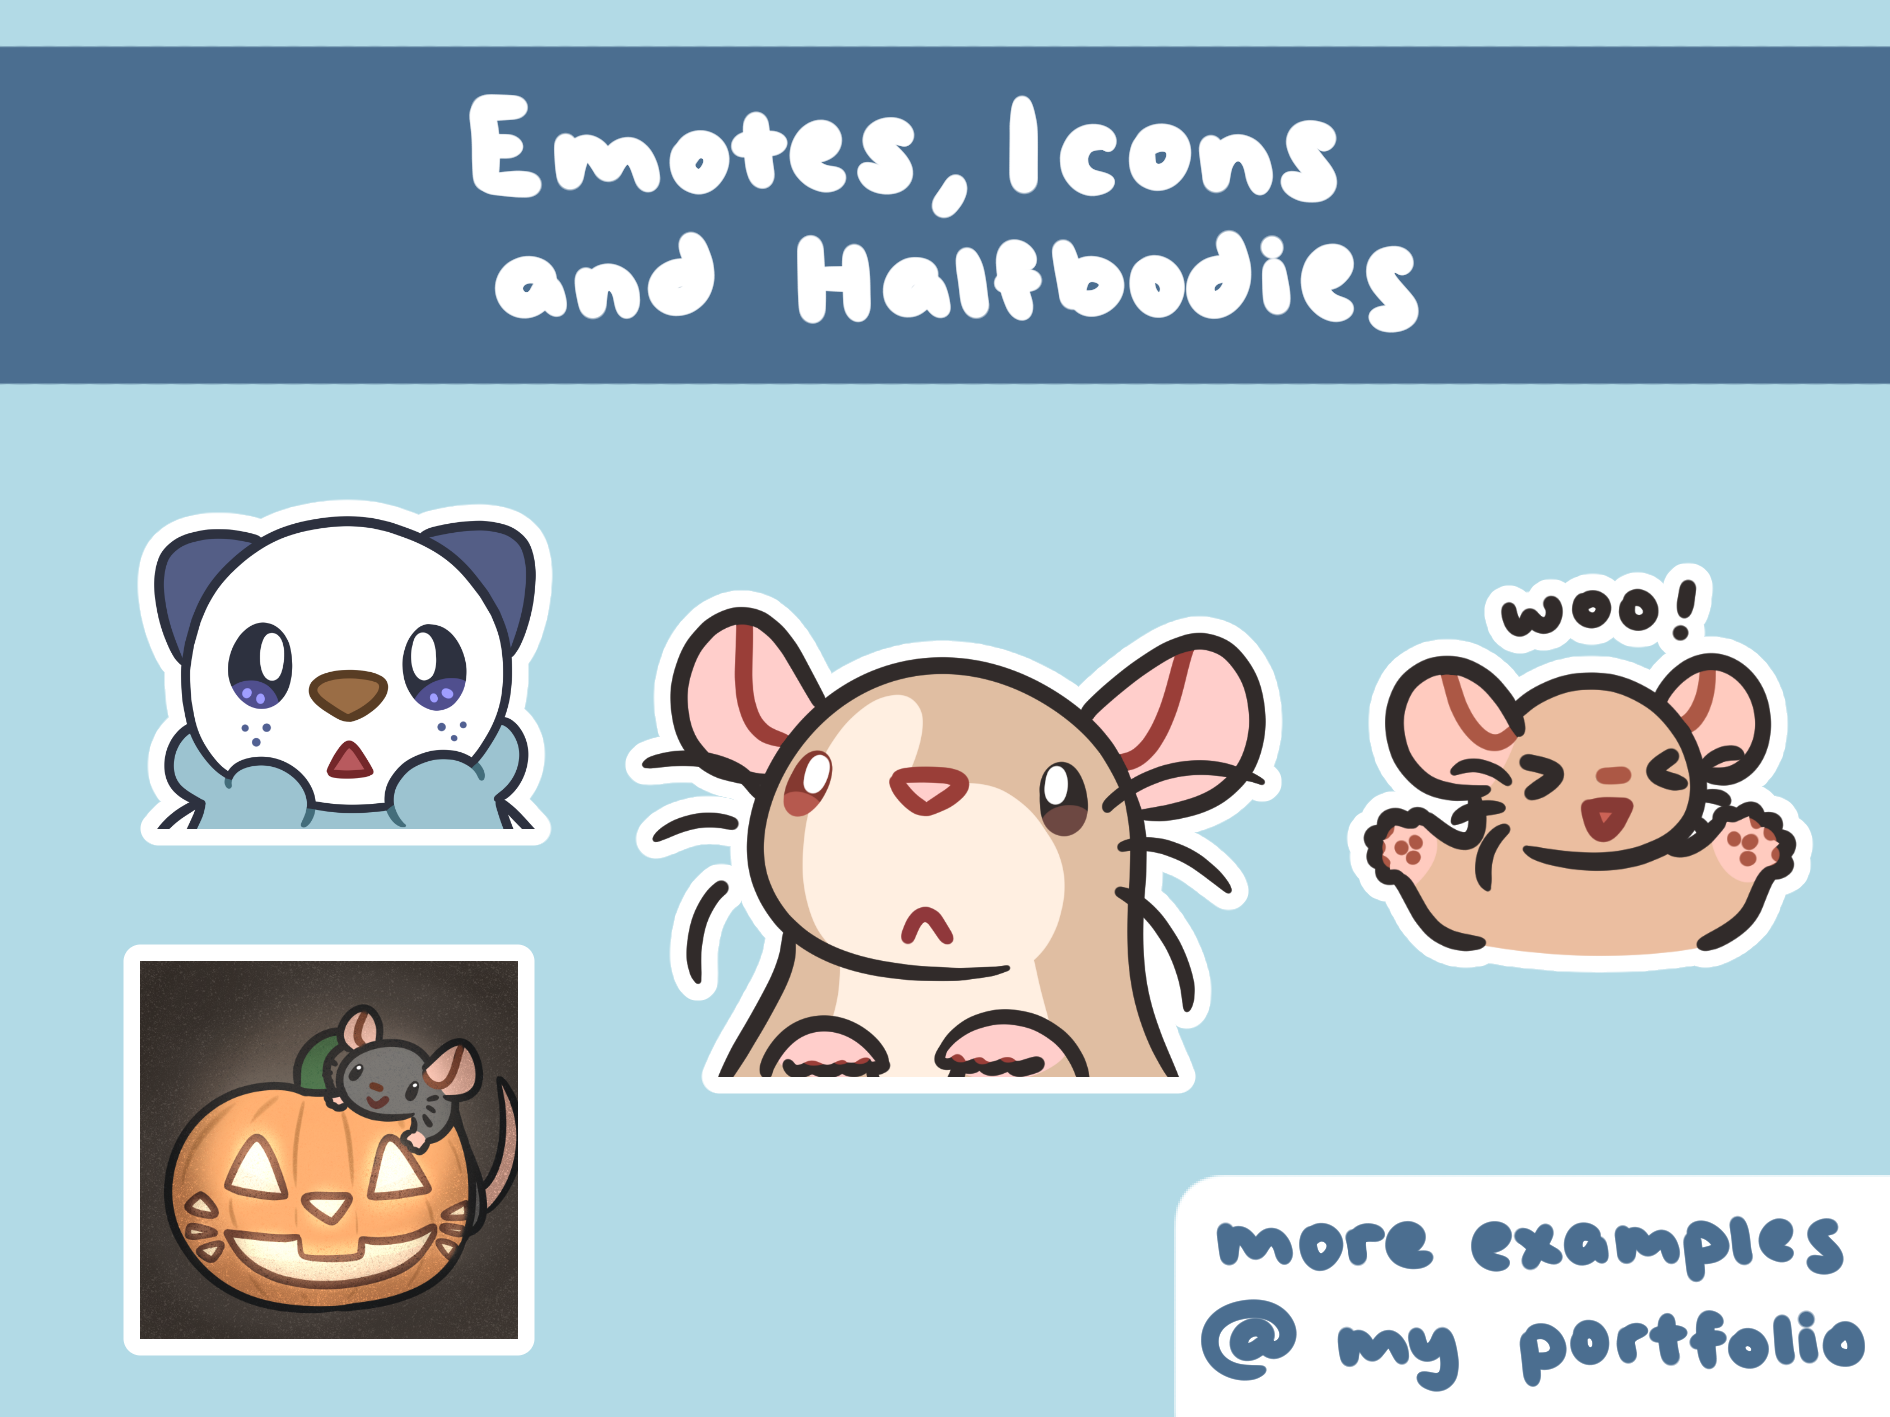 Emotes, Icons, and Halfbodies